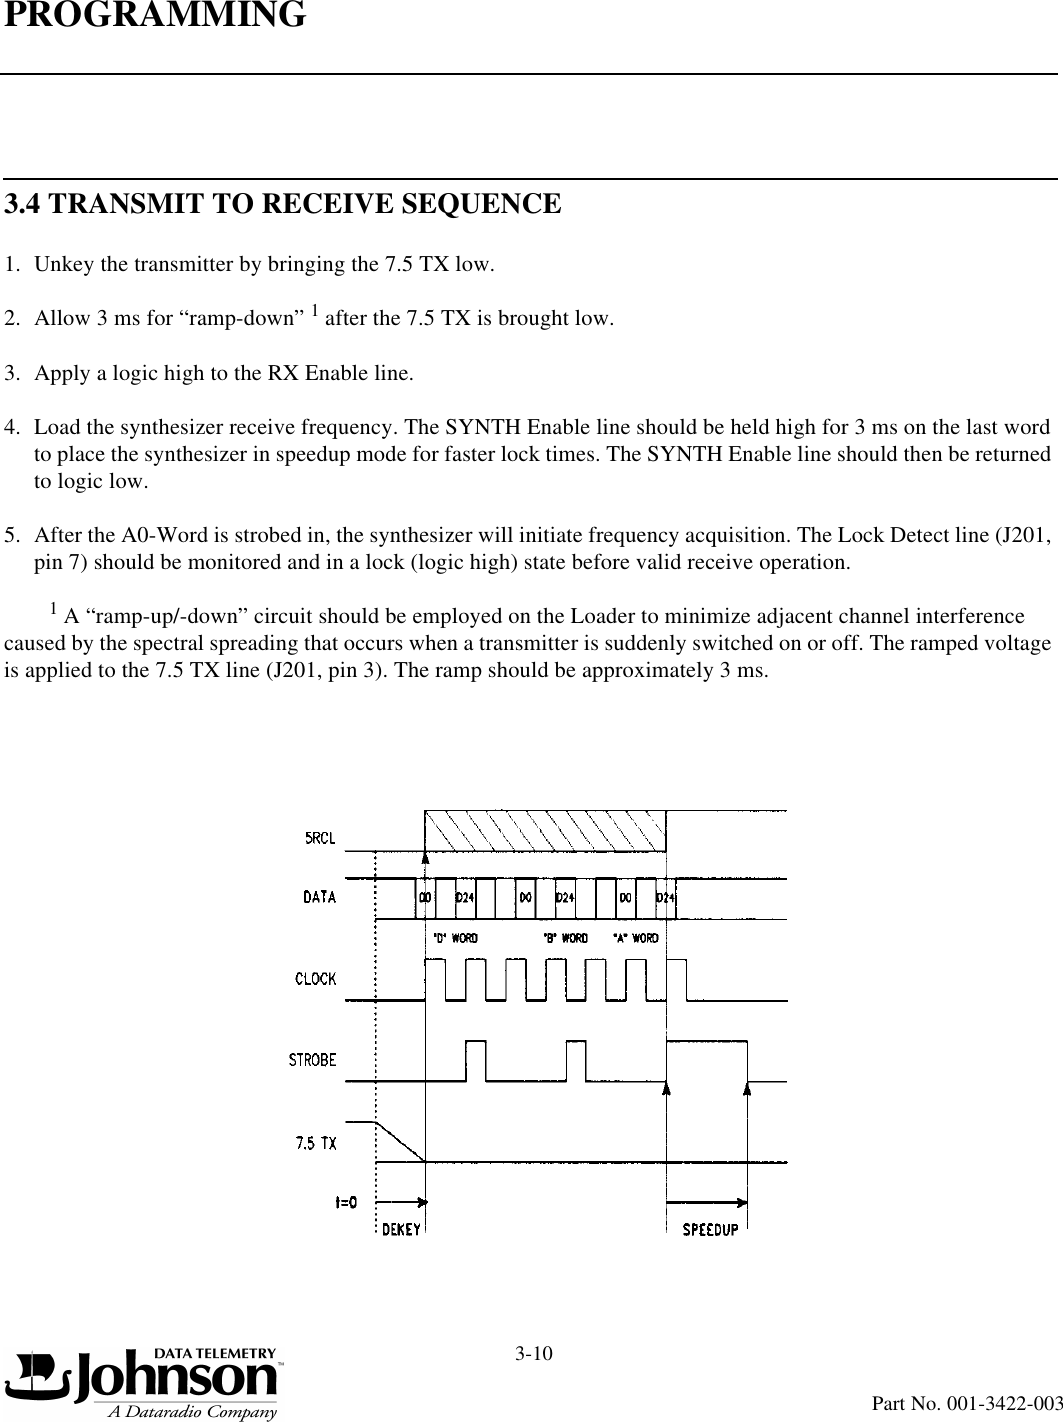 PROGRAMMING3-10Part No. 001-3422-0033.4 TRANSMIT TO RECEIVE SEQUENCE1. Unkey the transmitter by bringing the 7.5 TX low.2. Allow 3 ms for “ramp-down” 1 after the 7.5 TX is brought low.3. Apply a logic high to the RX Enable line.4. Load the synthesizer receive frequency. The SYNTH Enable line should be held high for 3 ms on the last word to place the synthesizer in speedup mode for faster lock times. The SYNTH Enable line should then be returned to logic low.5. After the A0-Word is strobed in, the synthesizer will initiate frequency acquisition. The Lock Detect line (J201, pin 7) should be monitored and in a lock (logic high) state before valid receive operation.1 A “ramp-up/-down” circuit should be employed on the Loader to minimize adjacent channel interference caused by the spectral spreading that occurs when a transmitter is suddenly switched on or off. The ramped voltage is applied to the 7.5 TX line (J201, pin 3). The ramp should be approximately 3 ms.